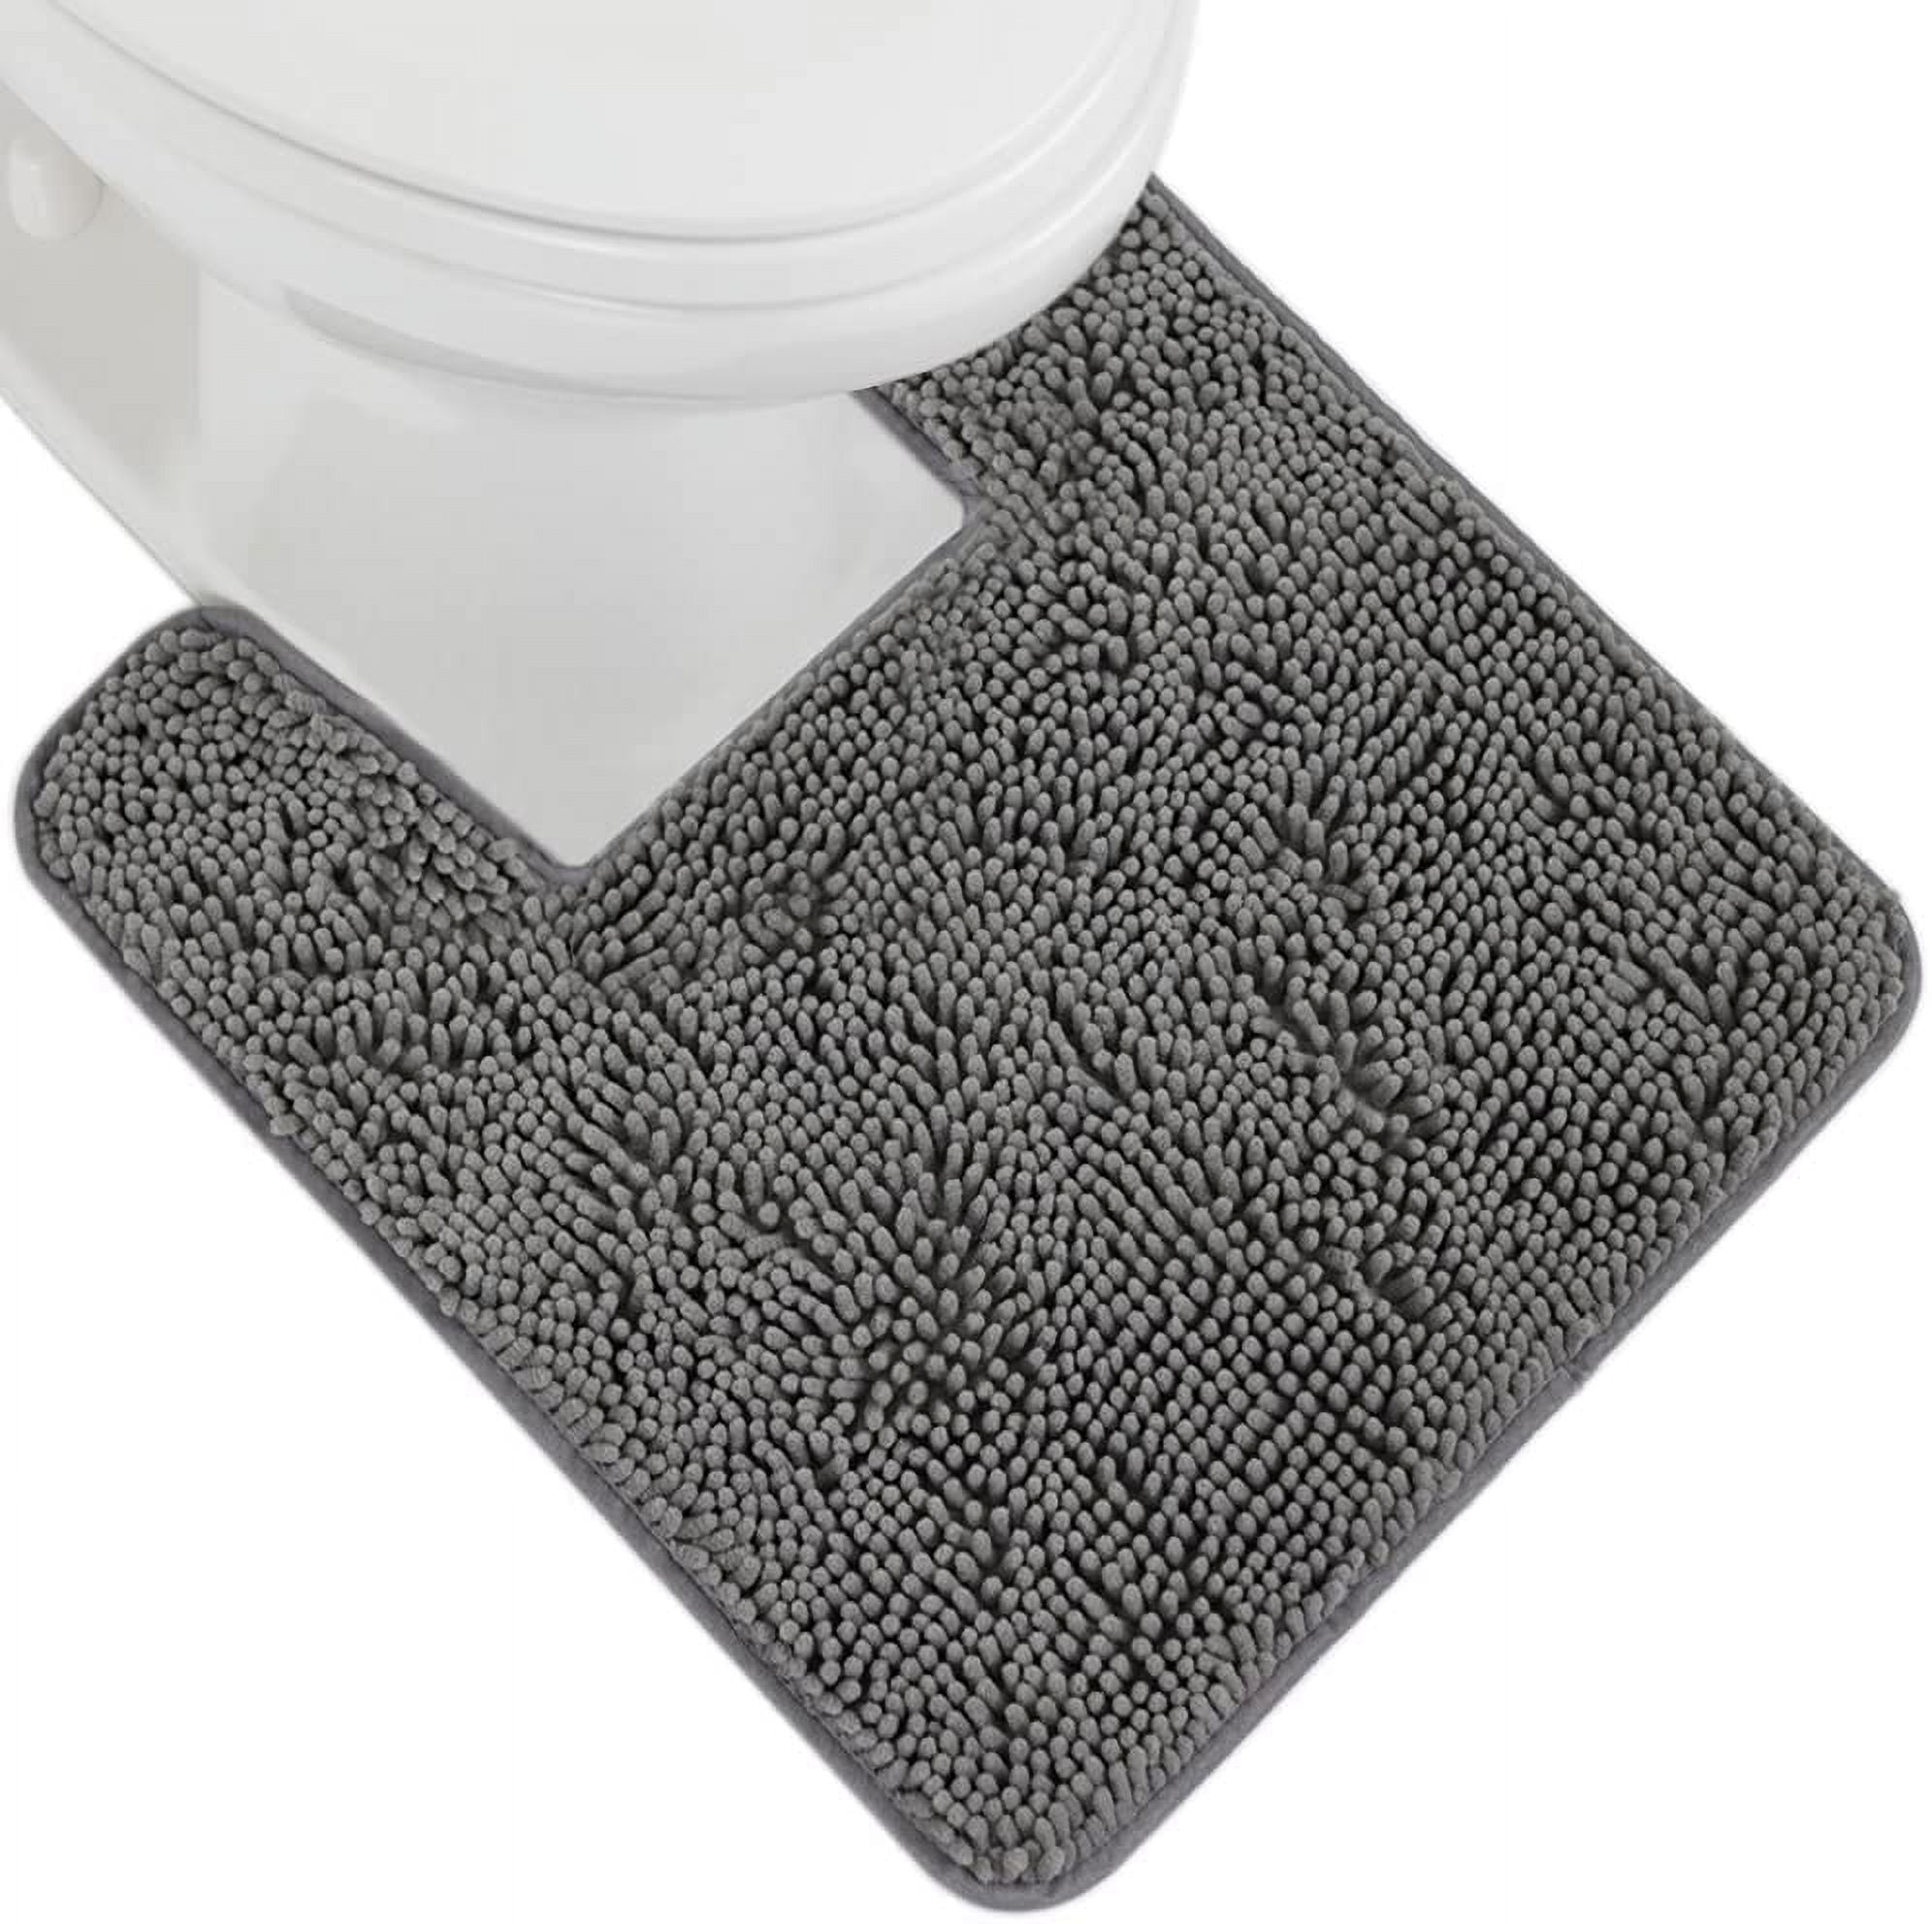  Gorilla Grip Bath Rug 30x20, Thick Soft Absorbent Chenille,  Rubber Backing Quick Dry Microfiber Mats, Machine Washable Rugs for Shower  Floor, Bathroom Runner Bathmat Accessories Decor, Grey : Home & Kitchen